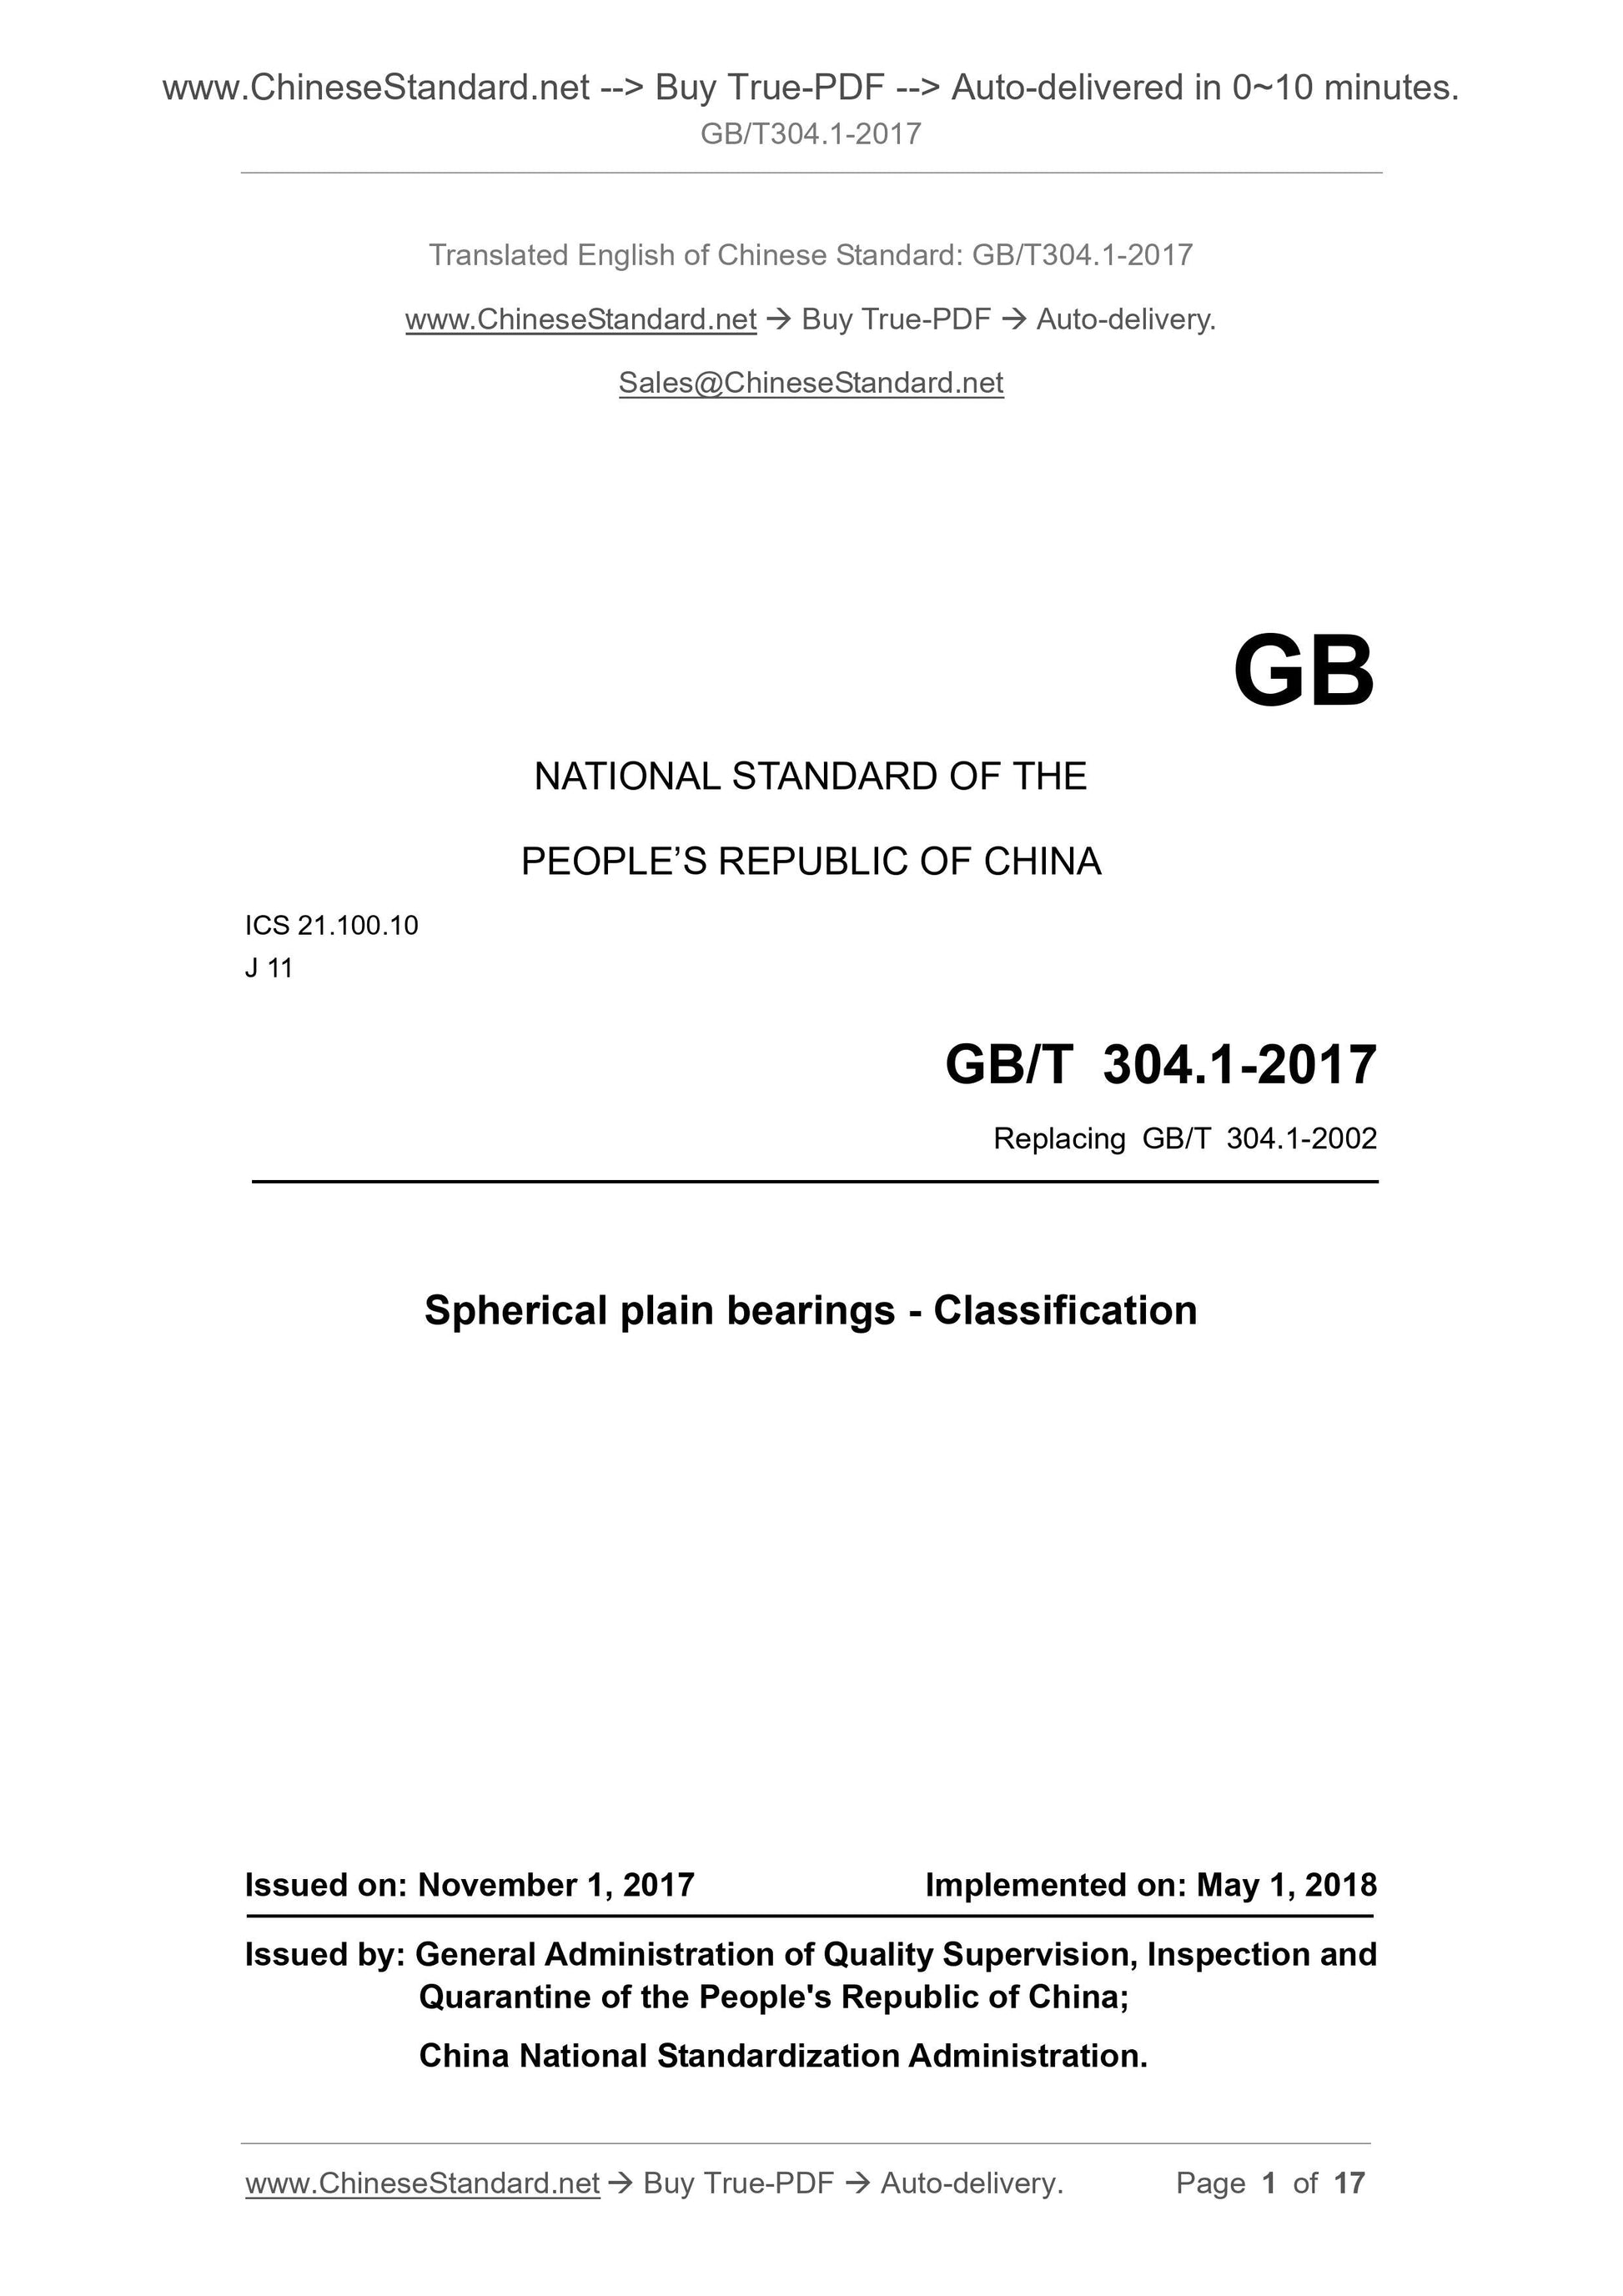 GB/T 304.1-2017 Page 1